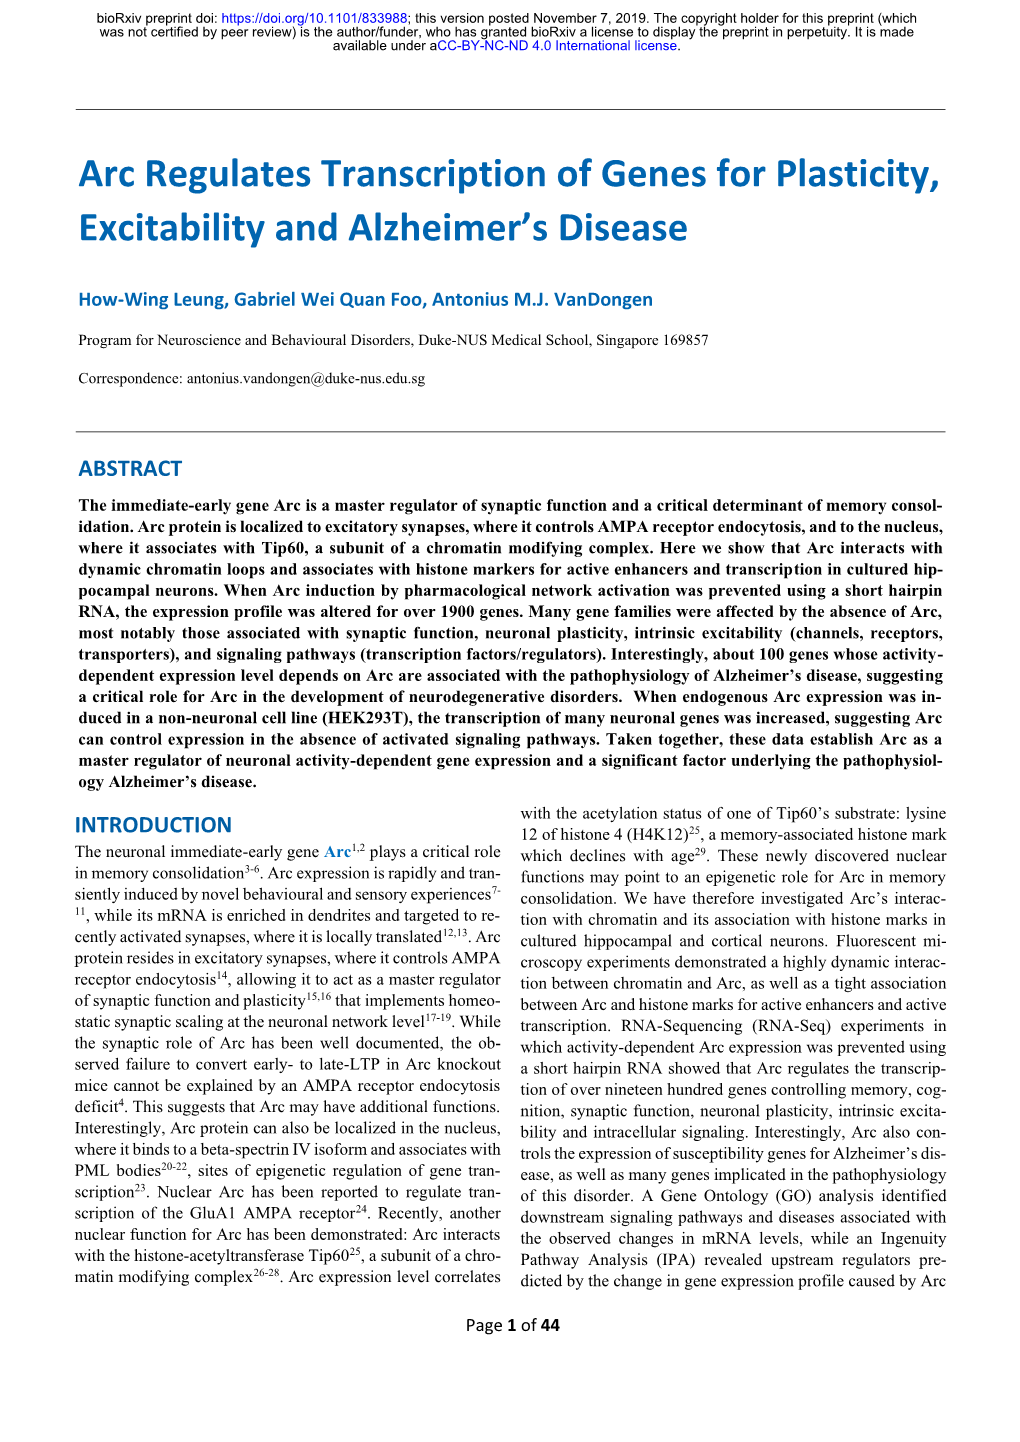 Arc Regulates Transcription of Genes for Plasticity, Excitability and Alzheimer’S Disease